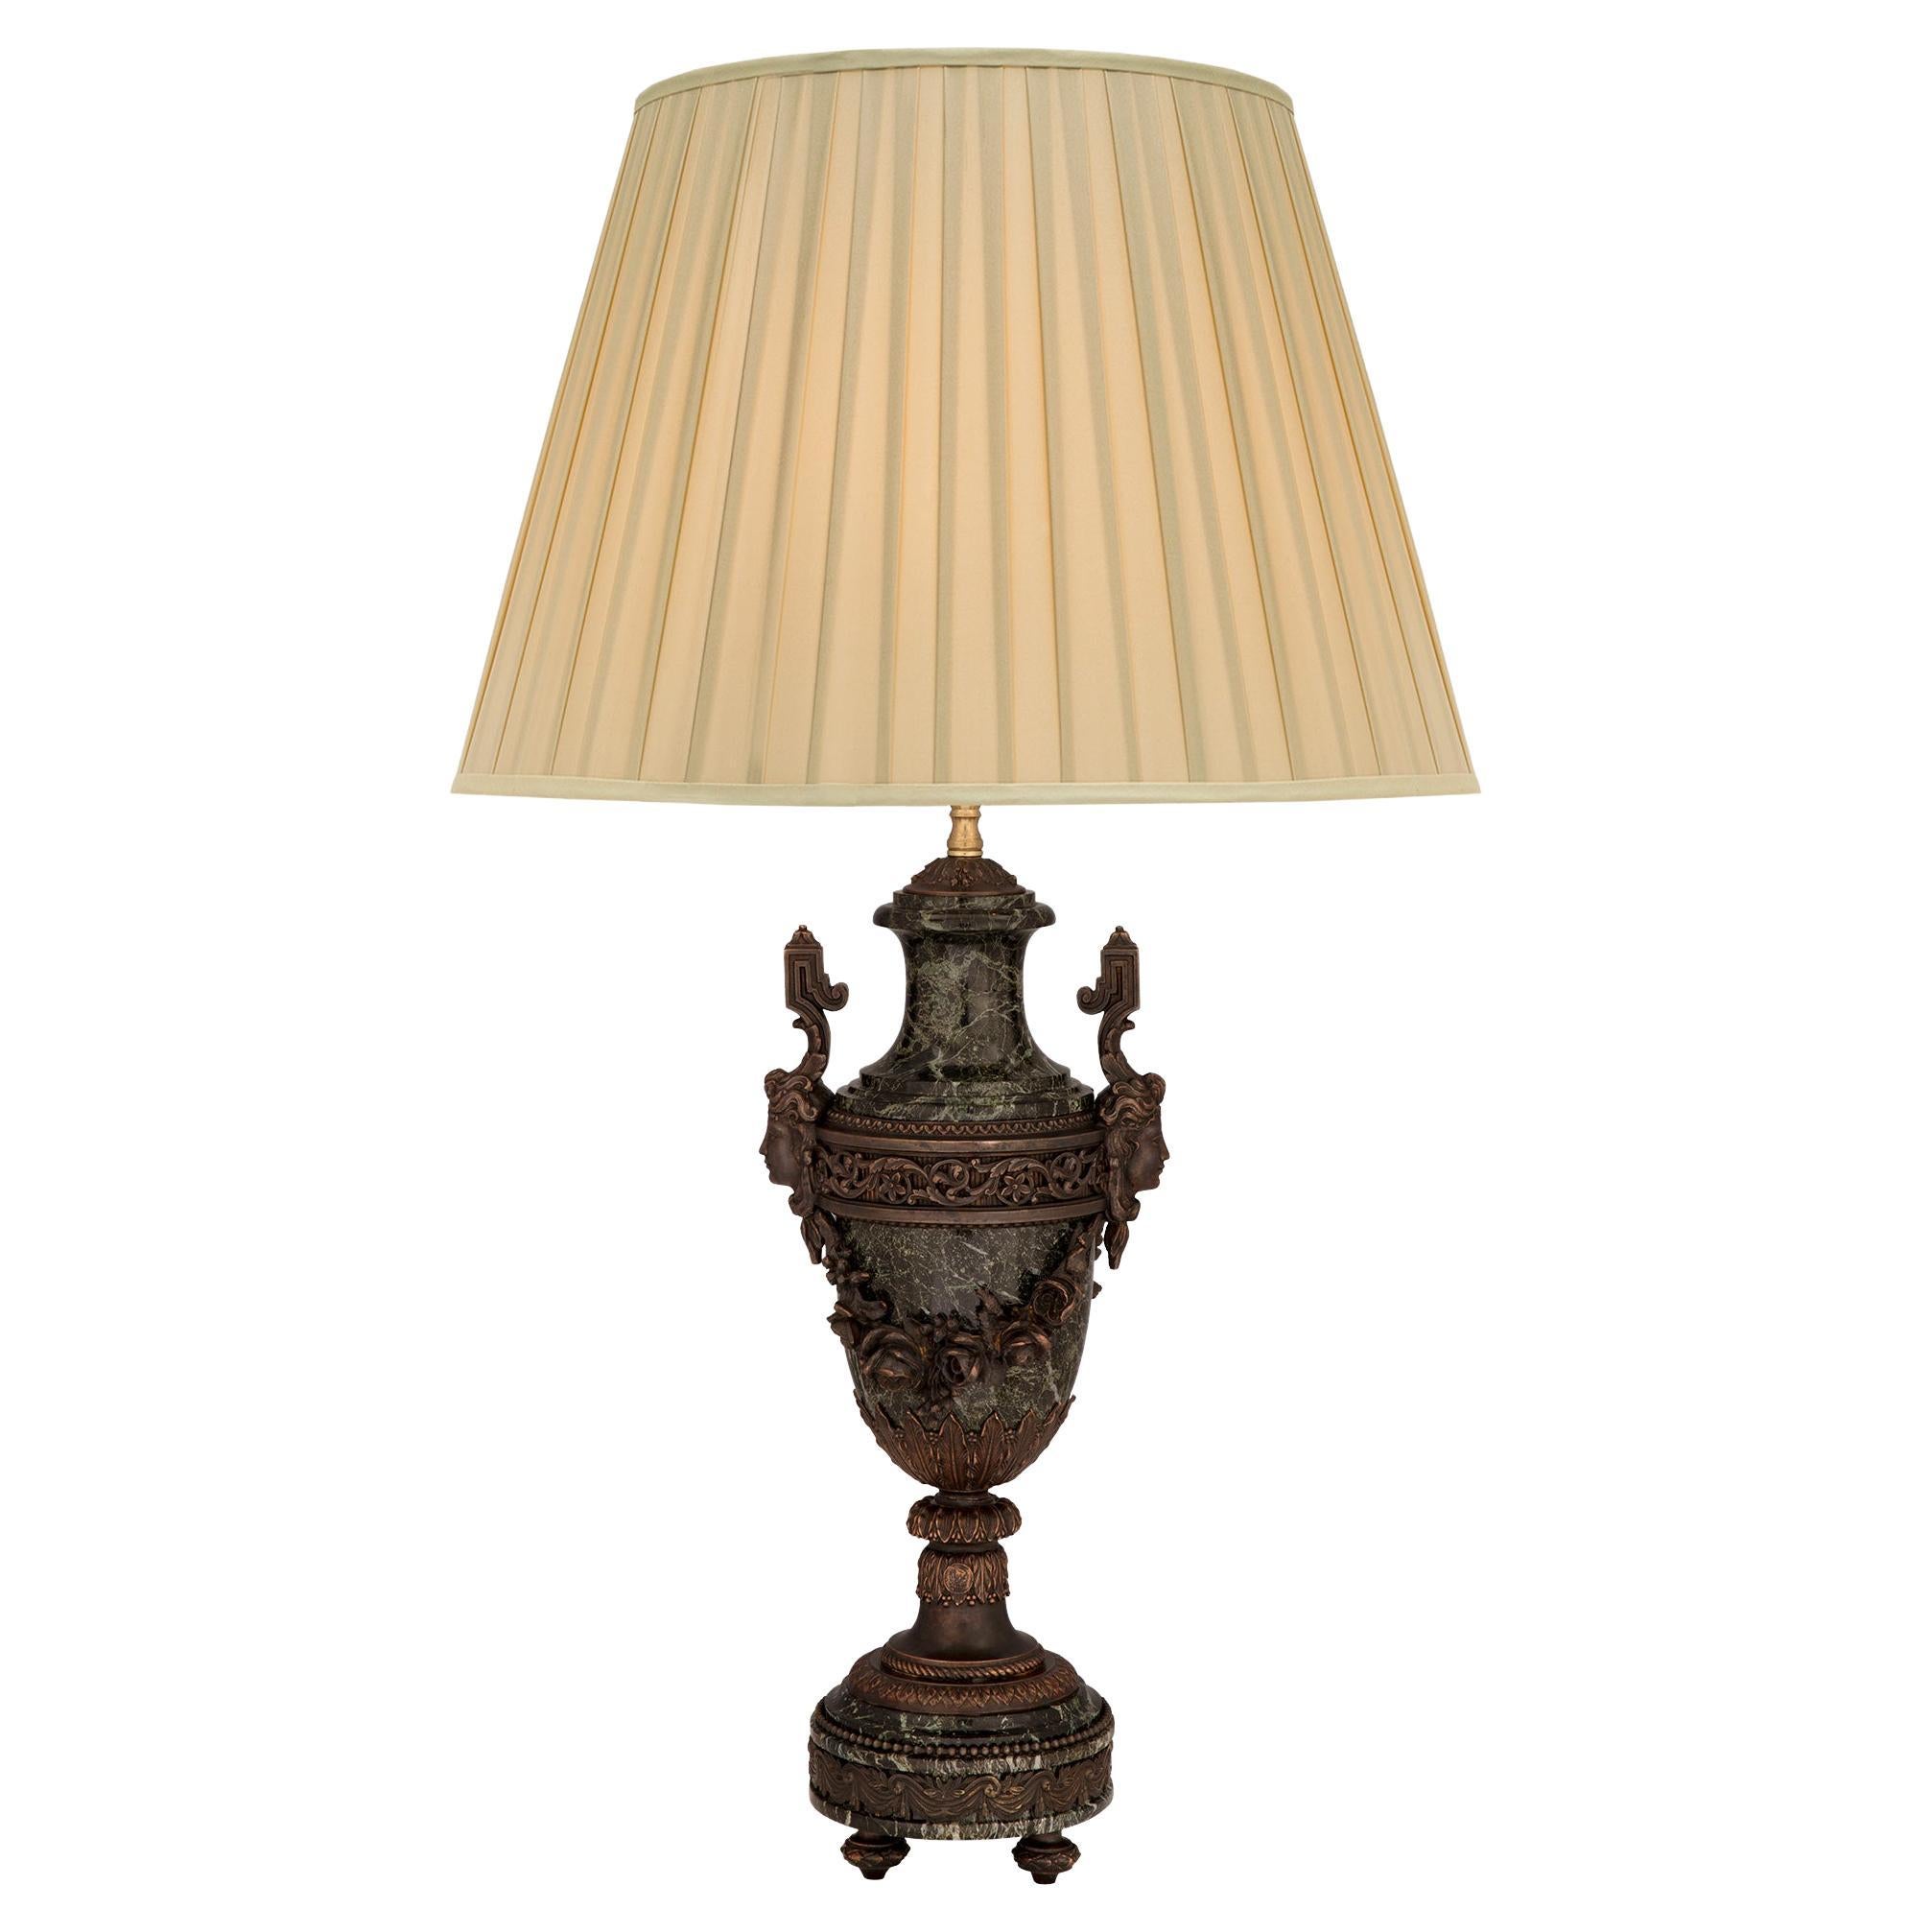 French 19th Century Louis XVI Style Patinated Bronze, Ormolu and Marble Lamp For Sale